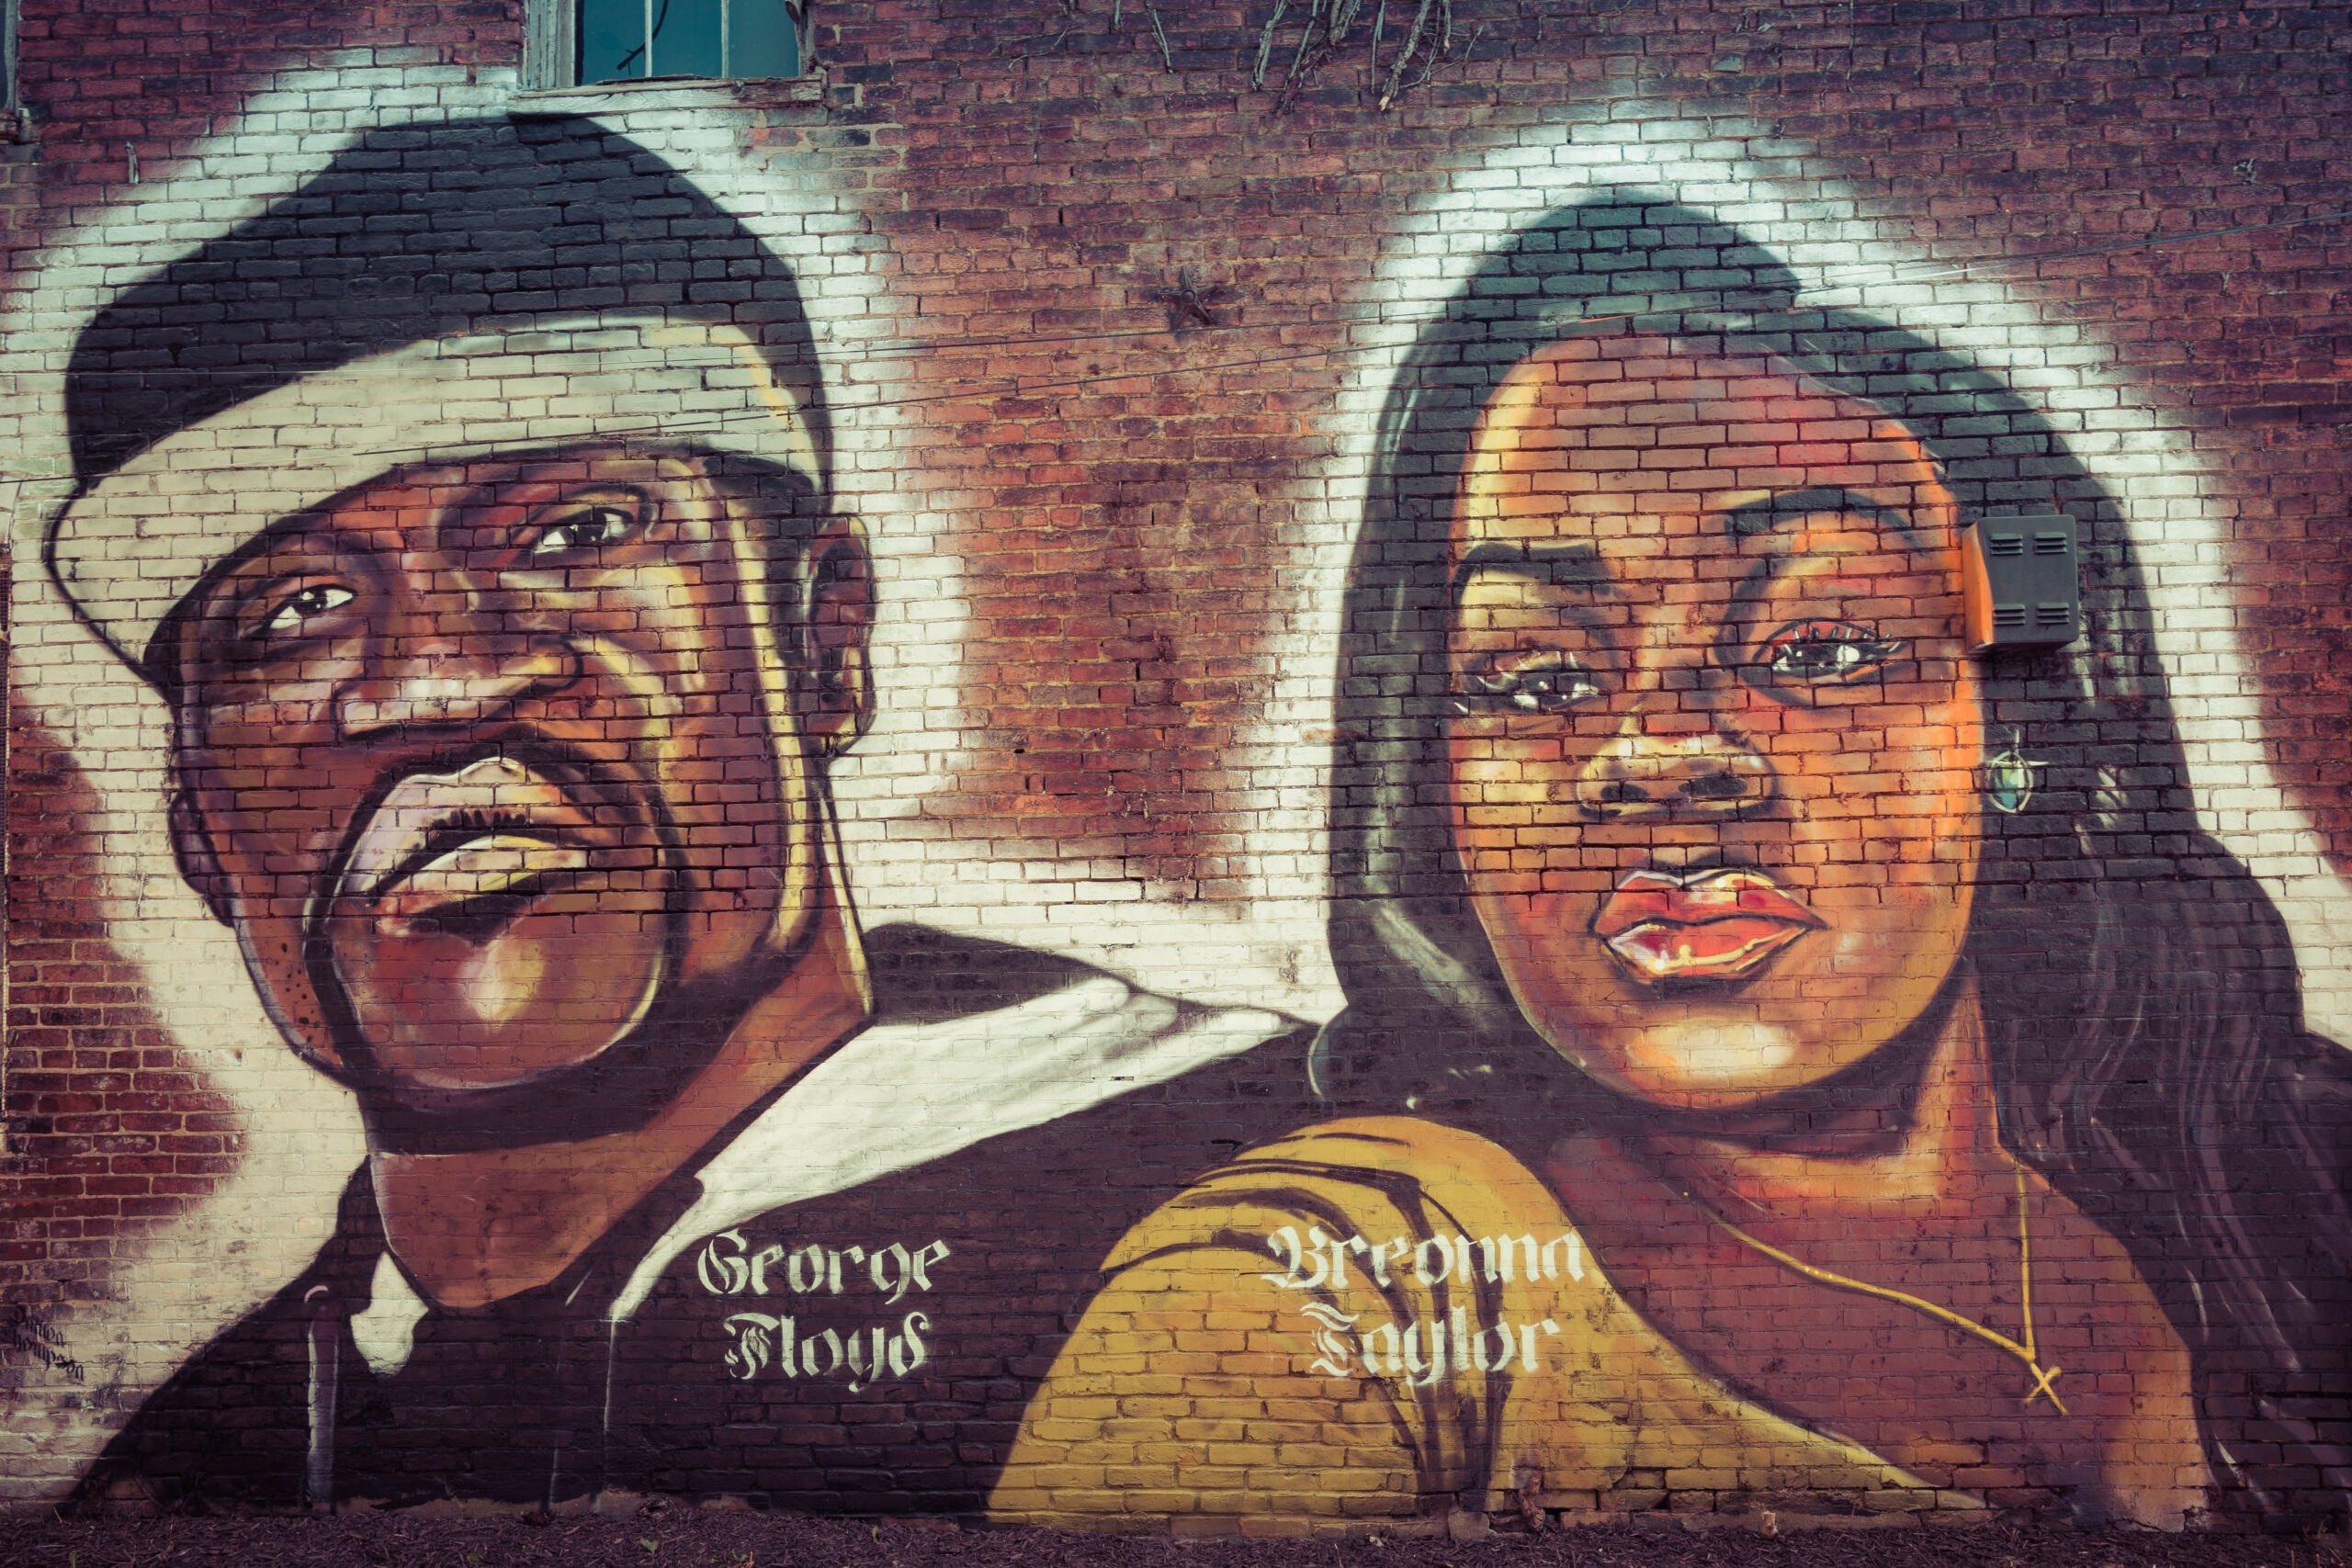 In memoriam of Breonna Taylor and George Floyd, R.I.P.